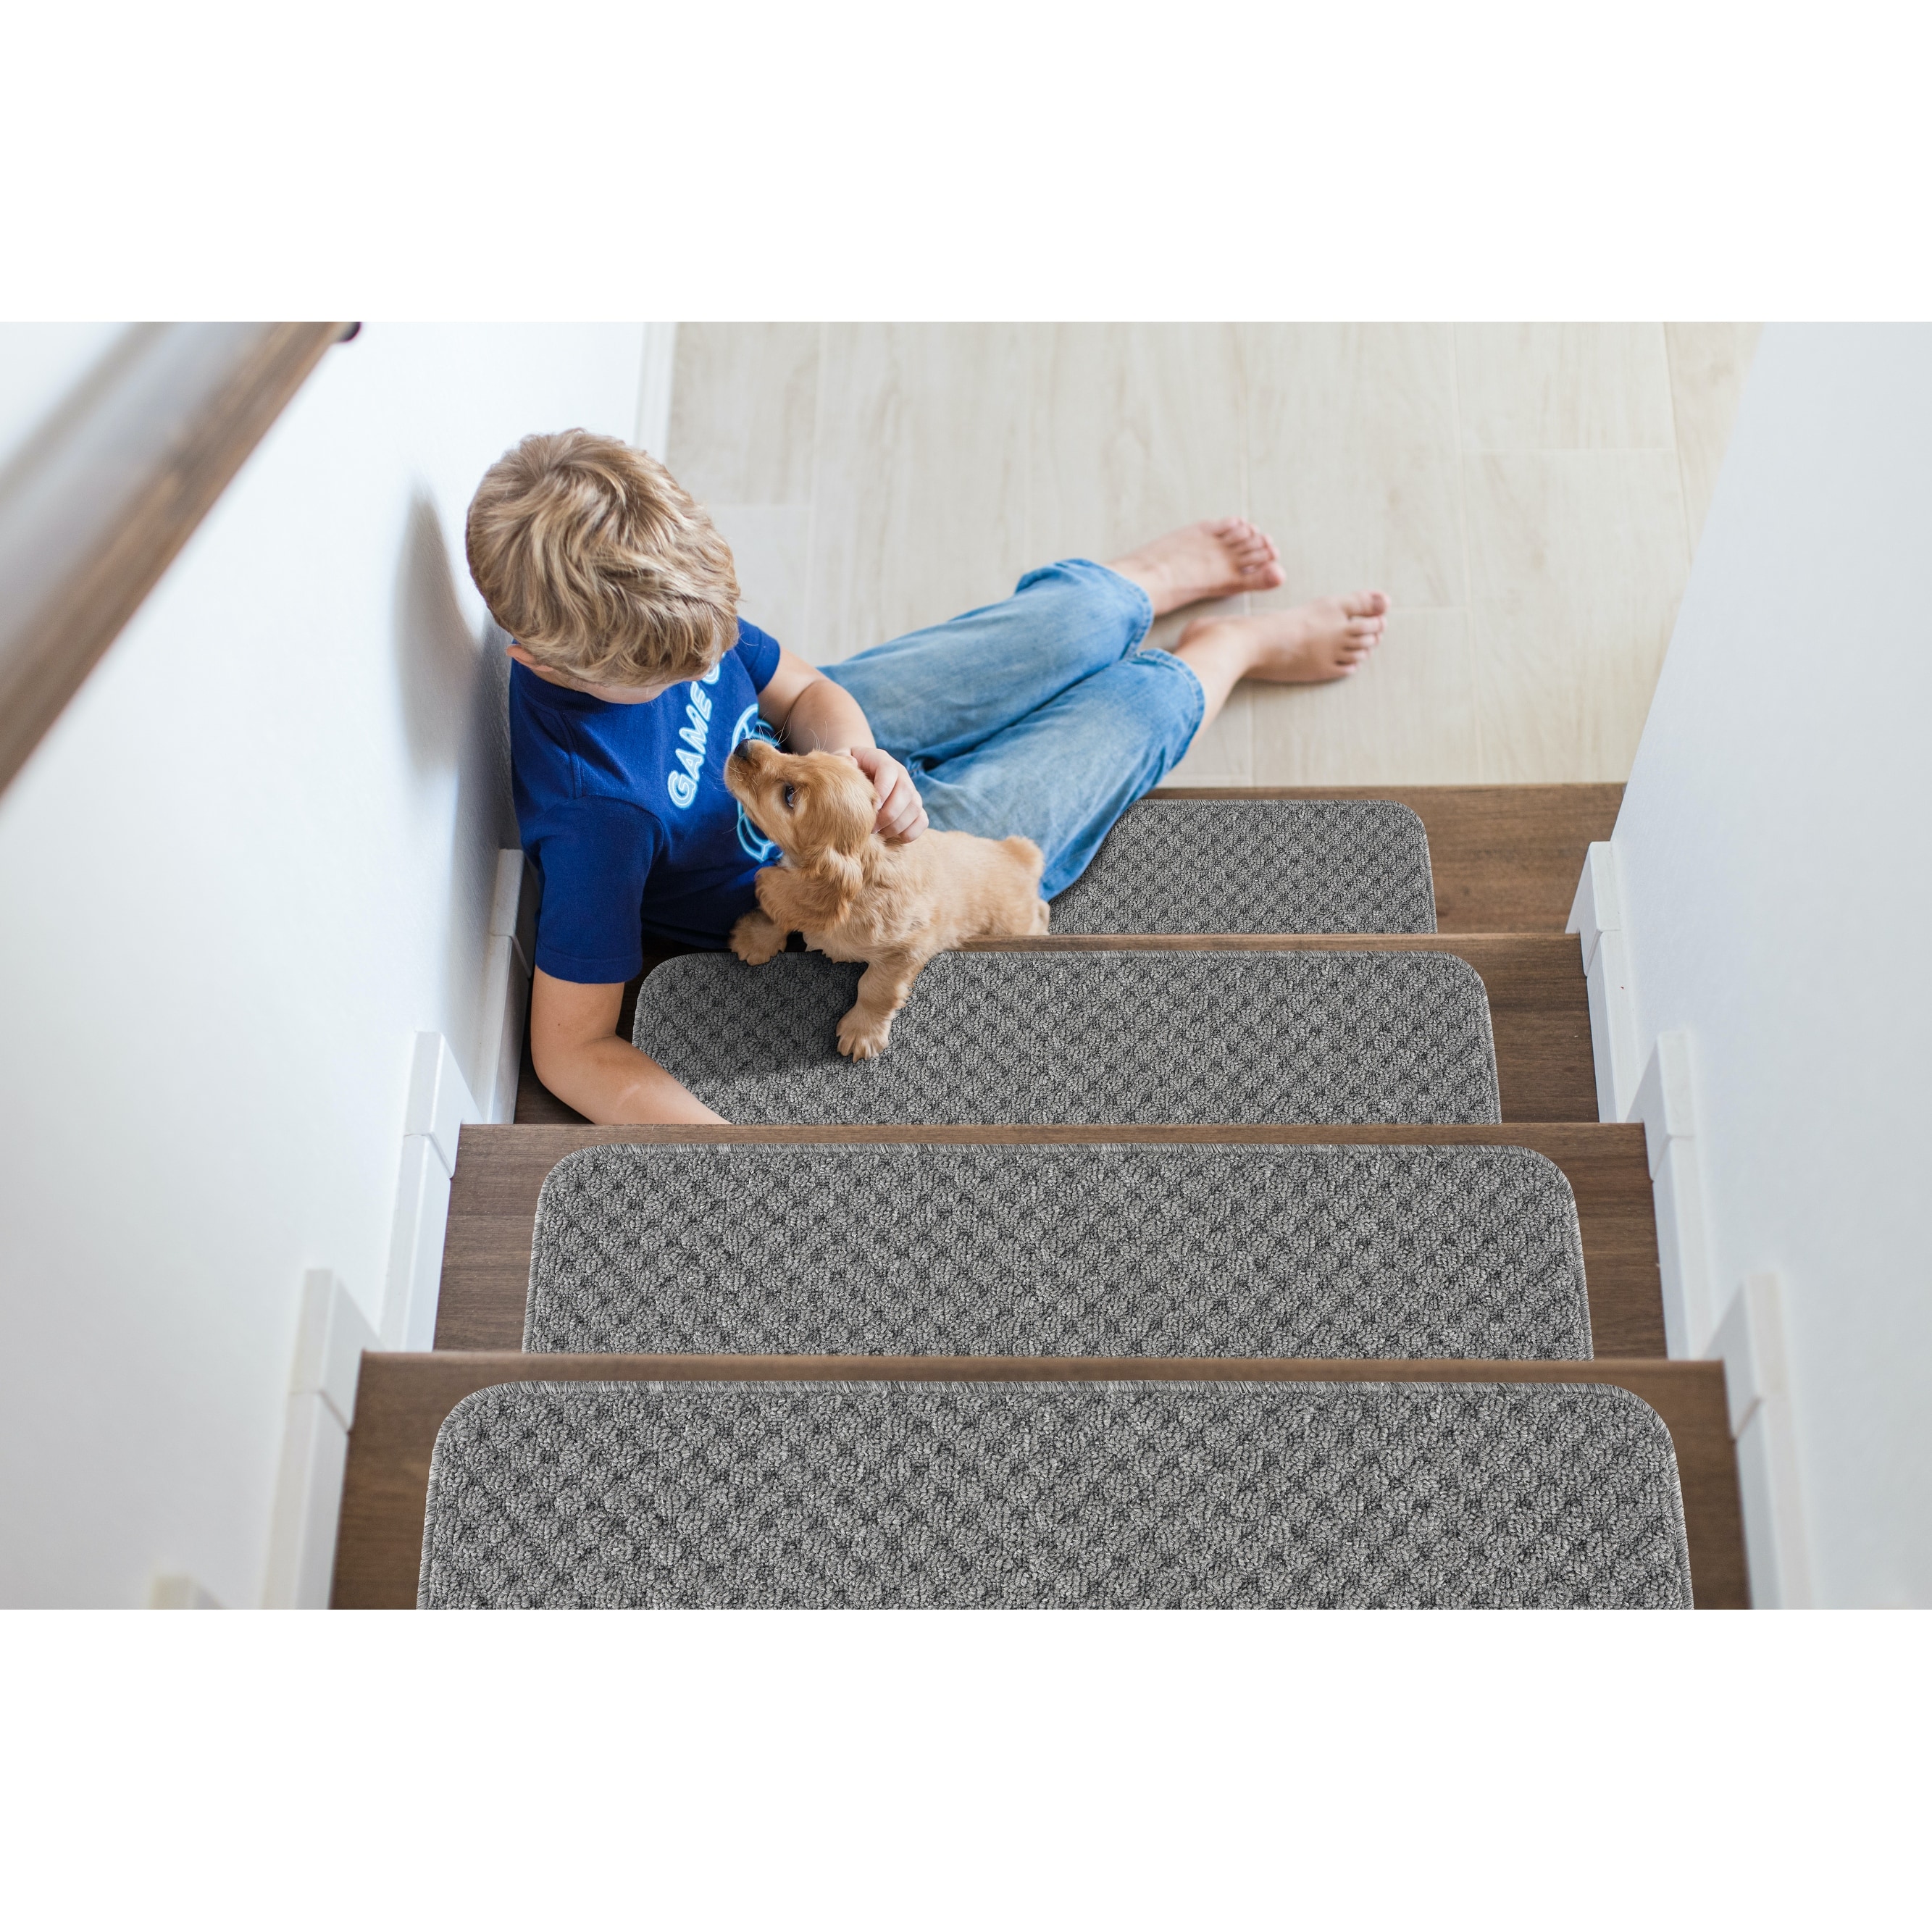 Rugs for Stairs FLORAL Set of 14 Non Slip Carpet Stair Treads 8.5" x 26" 